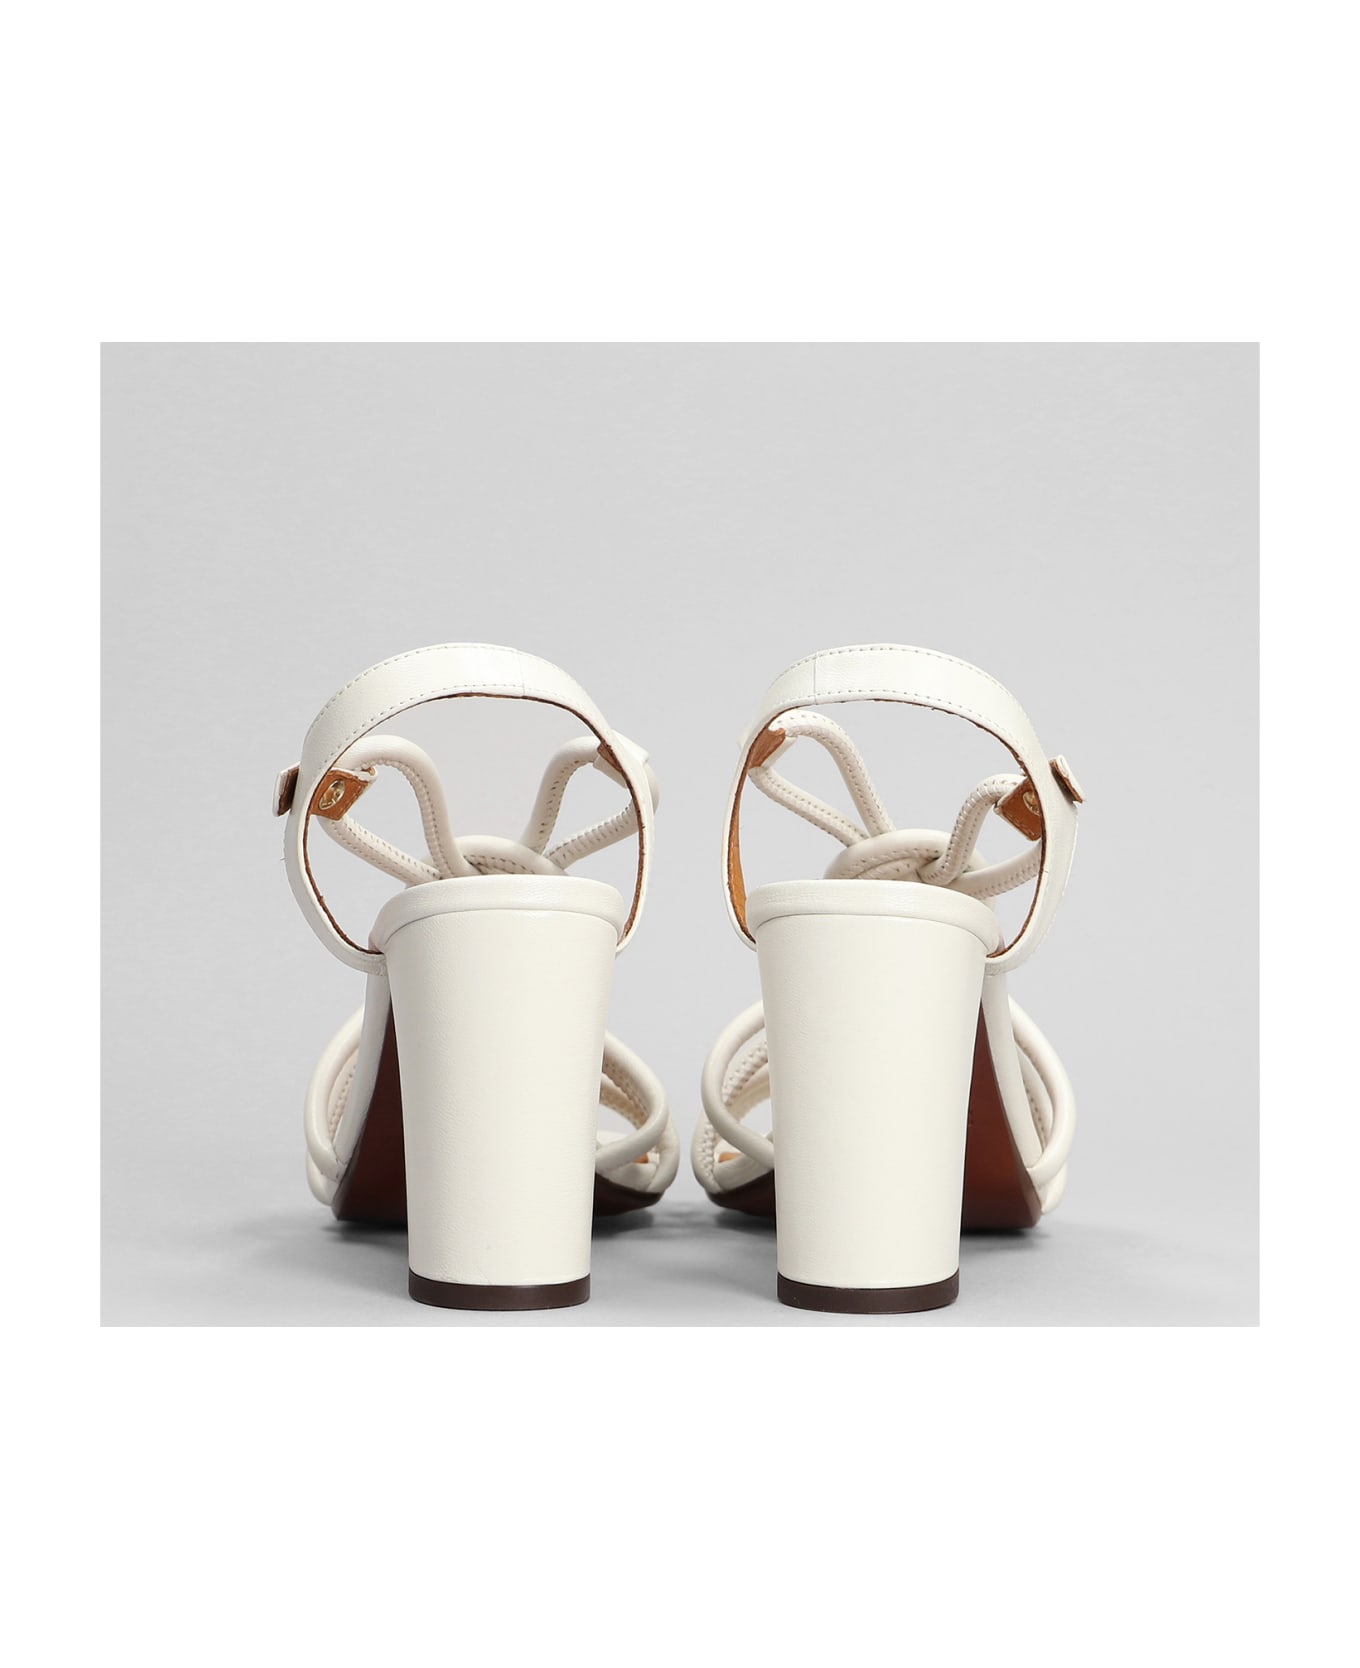 Chie Mihara Bane Sandals In White Leather - white